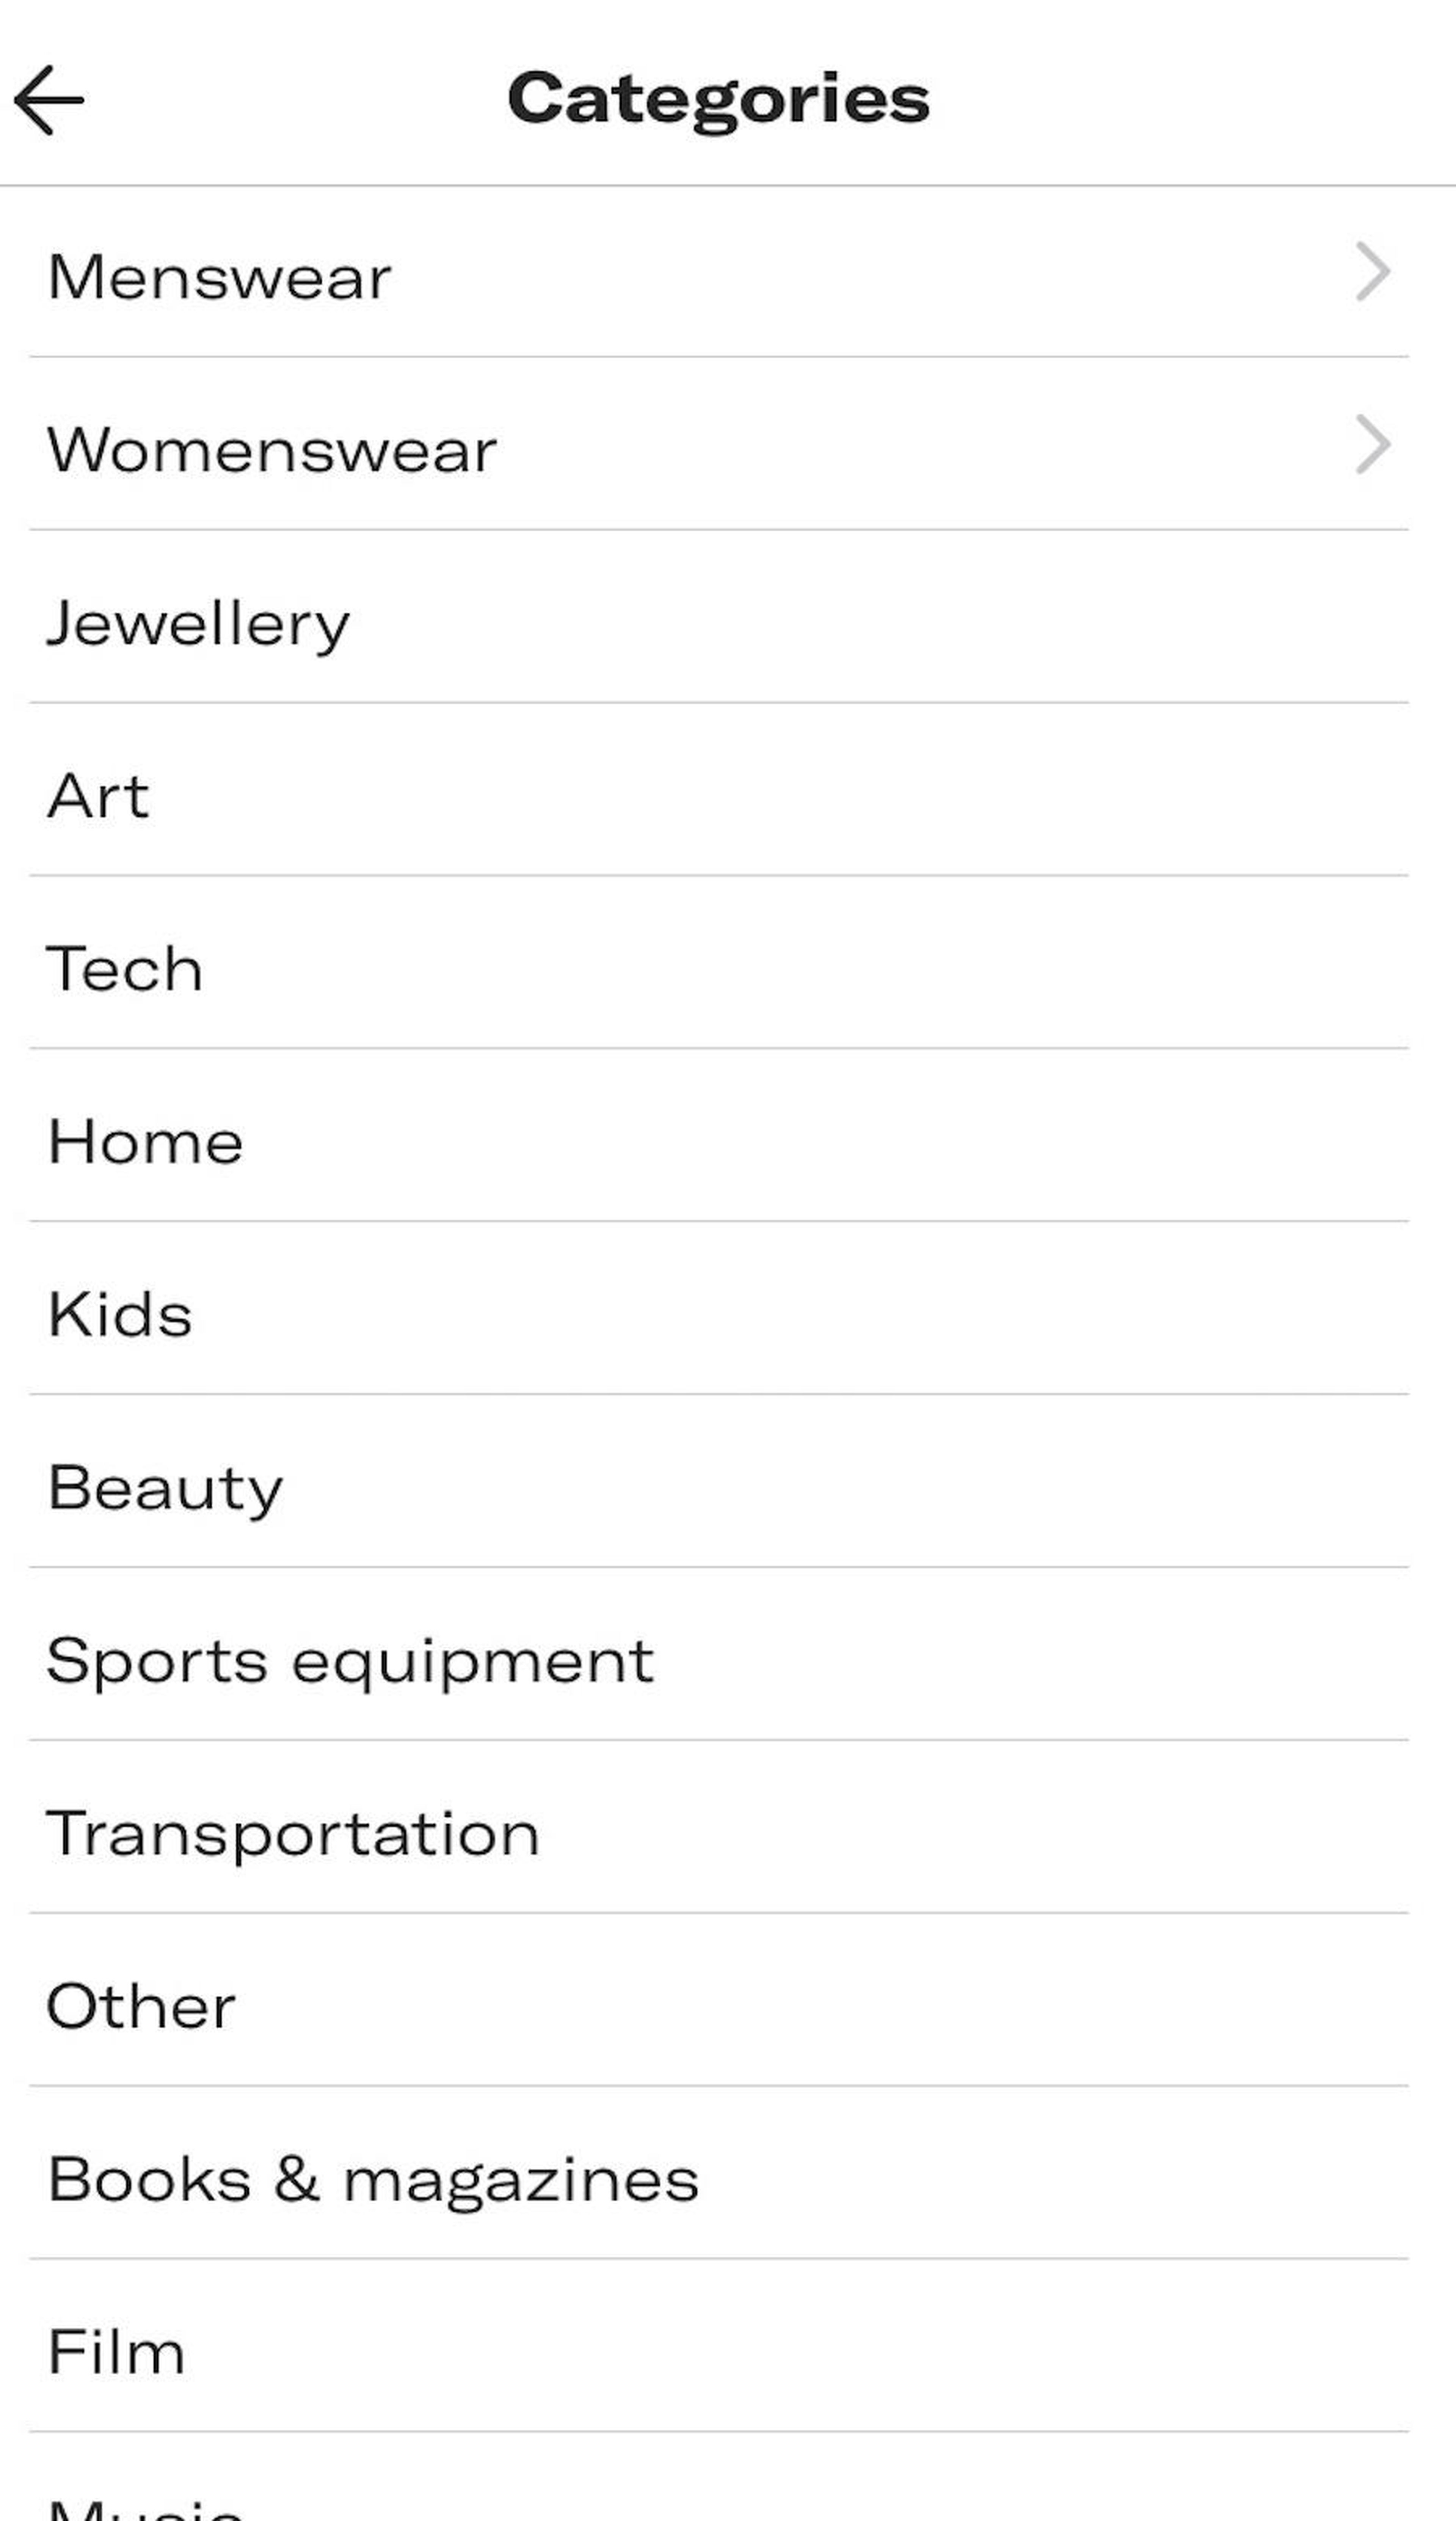 You're asked to select the category that the item falls under. These are umbrella categories, such as menswear, womenswear, or sports equipment, for example. You can add a more detailed description of the item in another box,